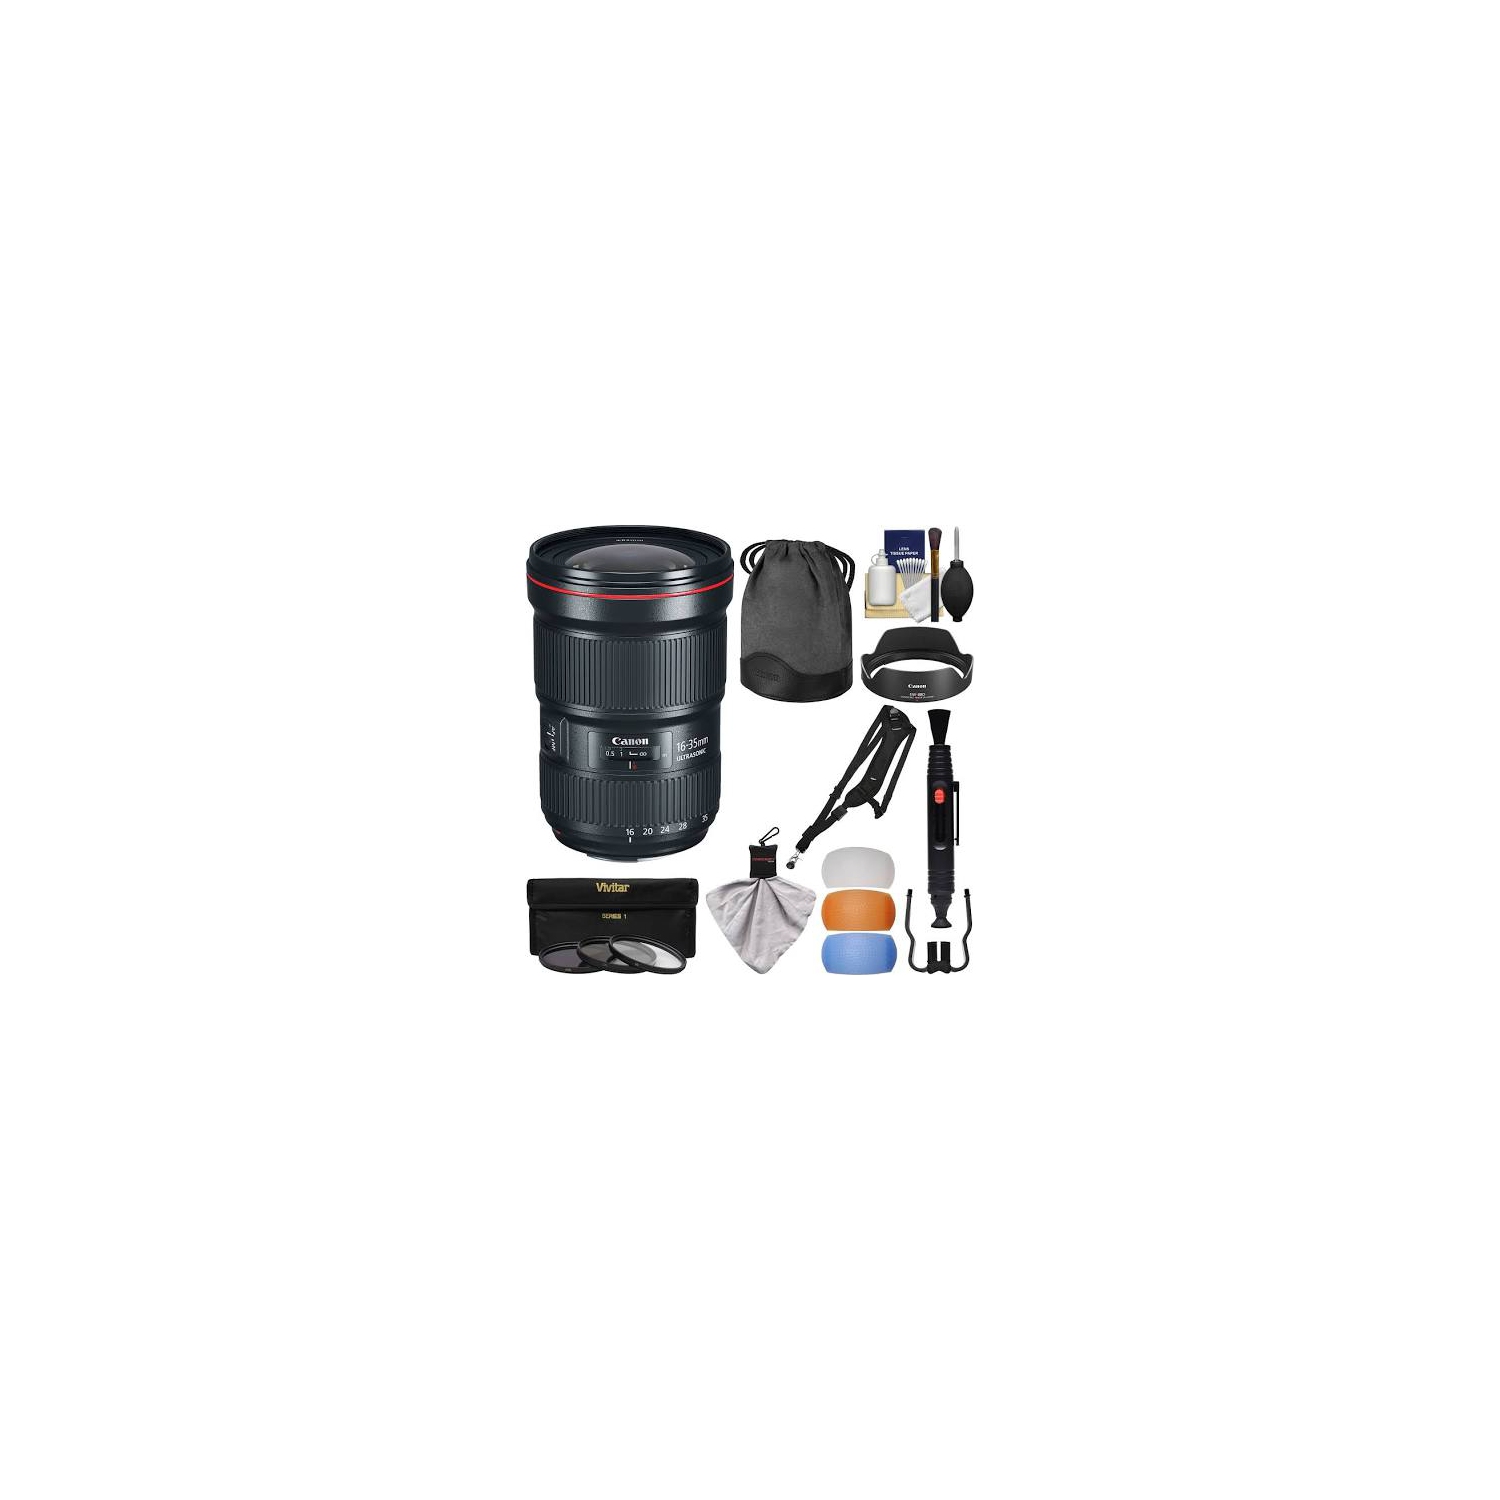 Canon EF 16-35mm f/2.8L III USM Zoom Lens with 3 UV/CPL/ND8 Filters + Flash Diffusers + Sling Strap + Kit - US Version w/ Seller Warranty